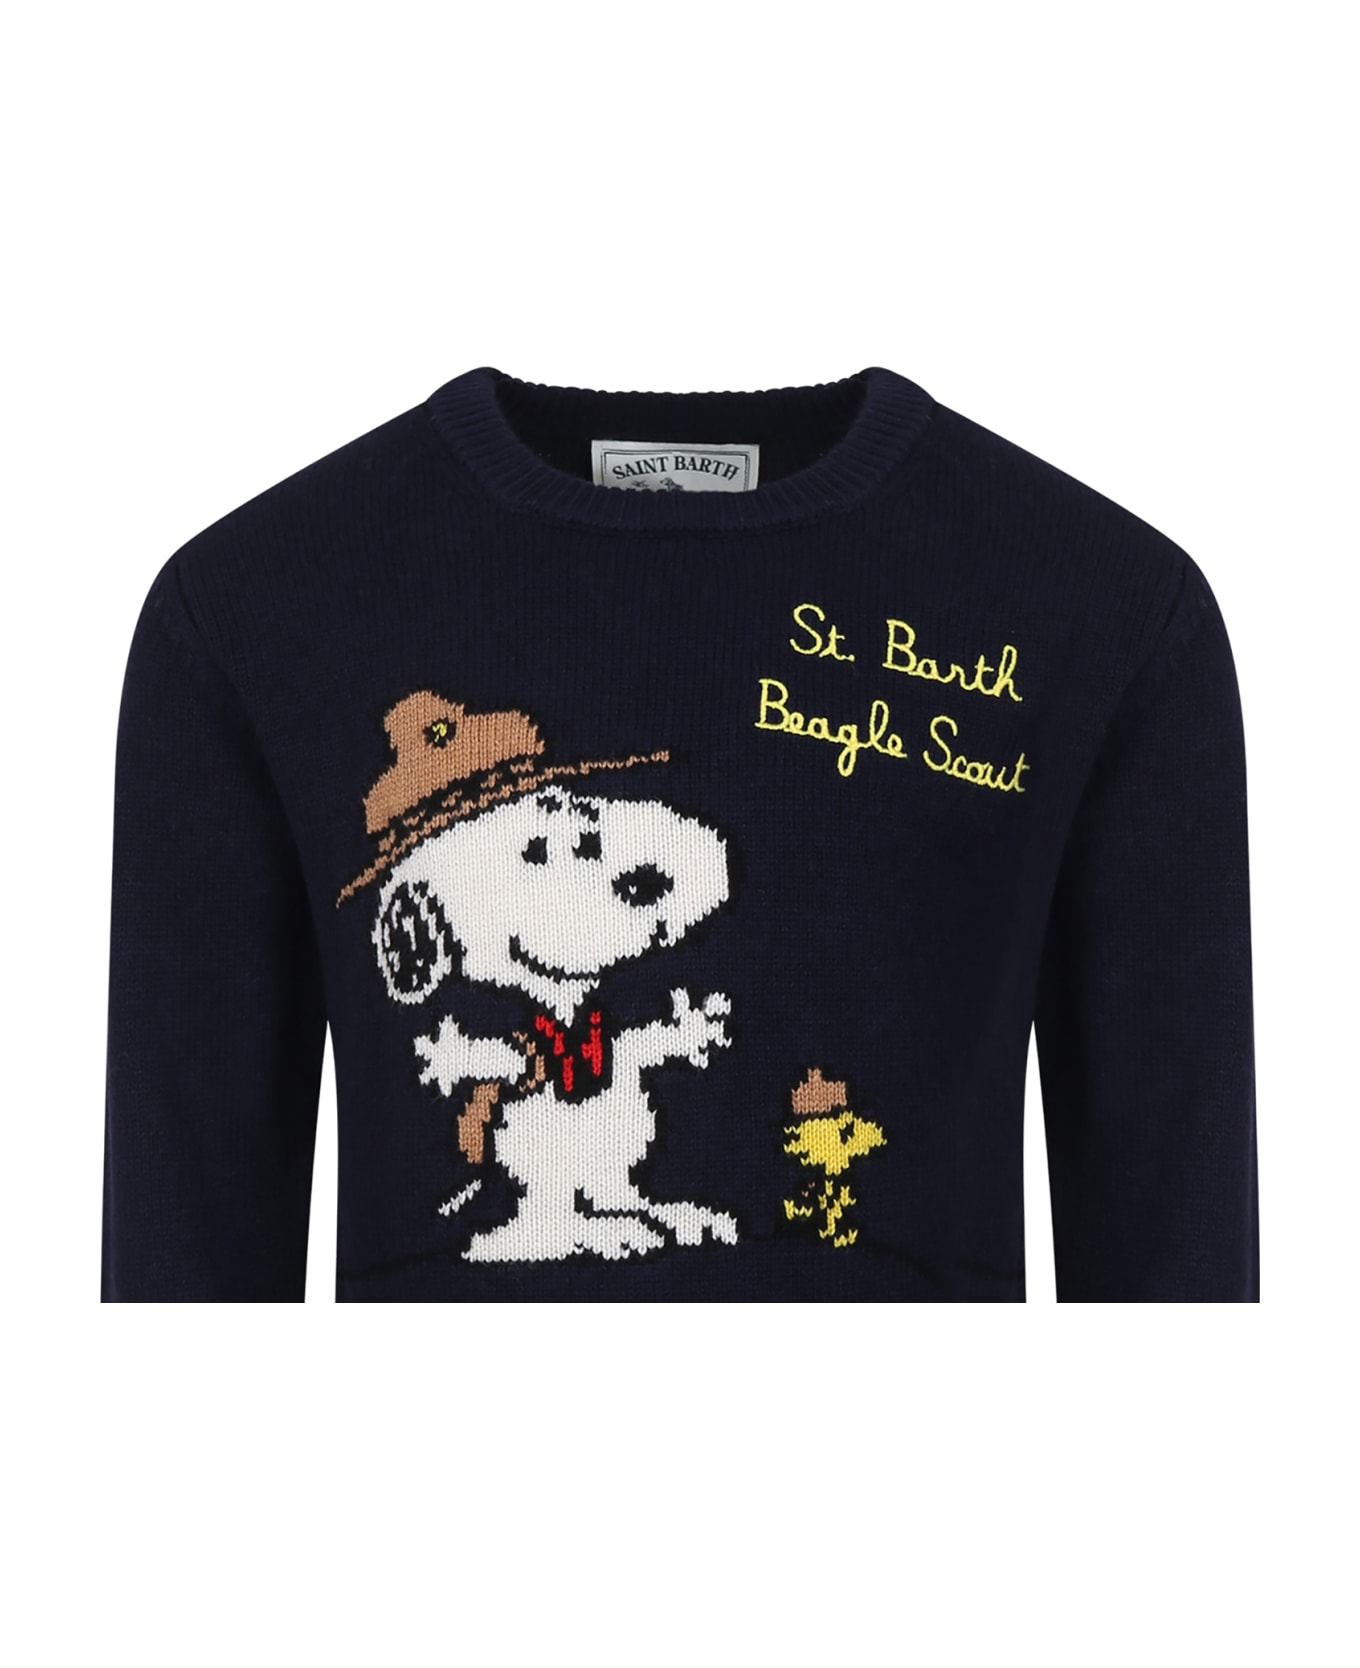 MC2 Saint Barth Blue Sweater For Boy With Snoopy Boy Scout - Blue